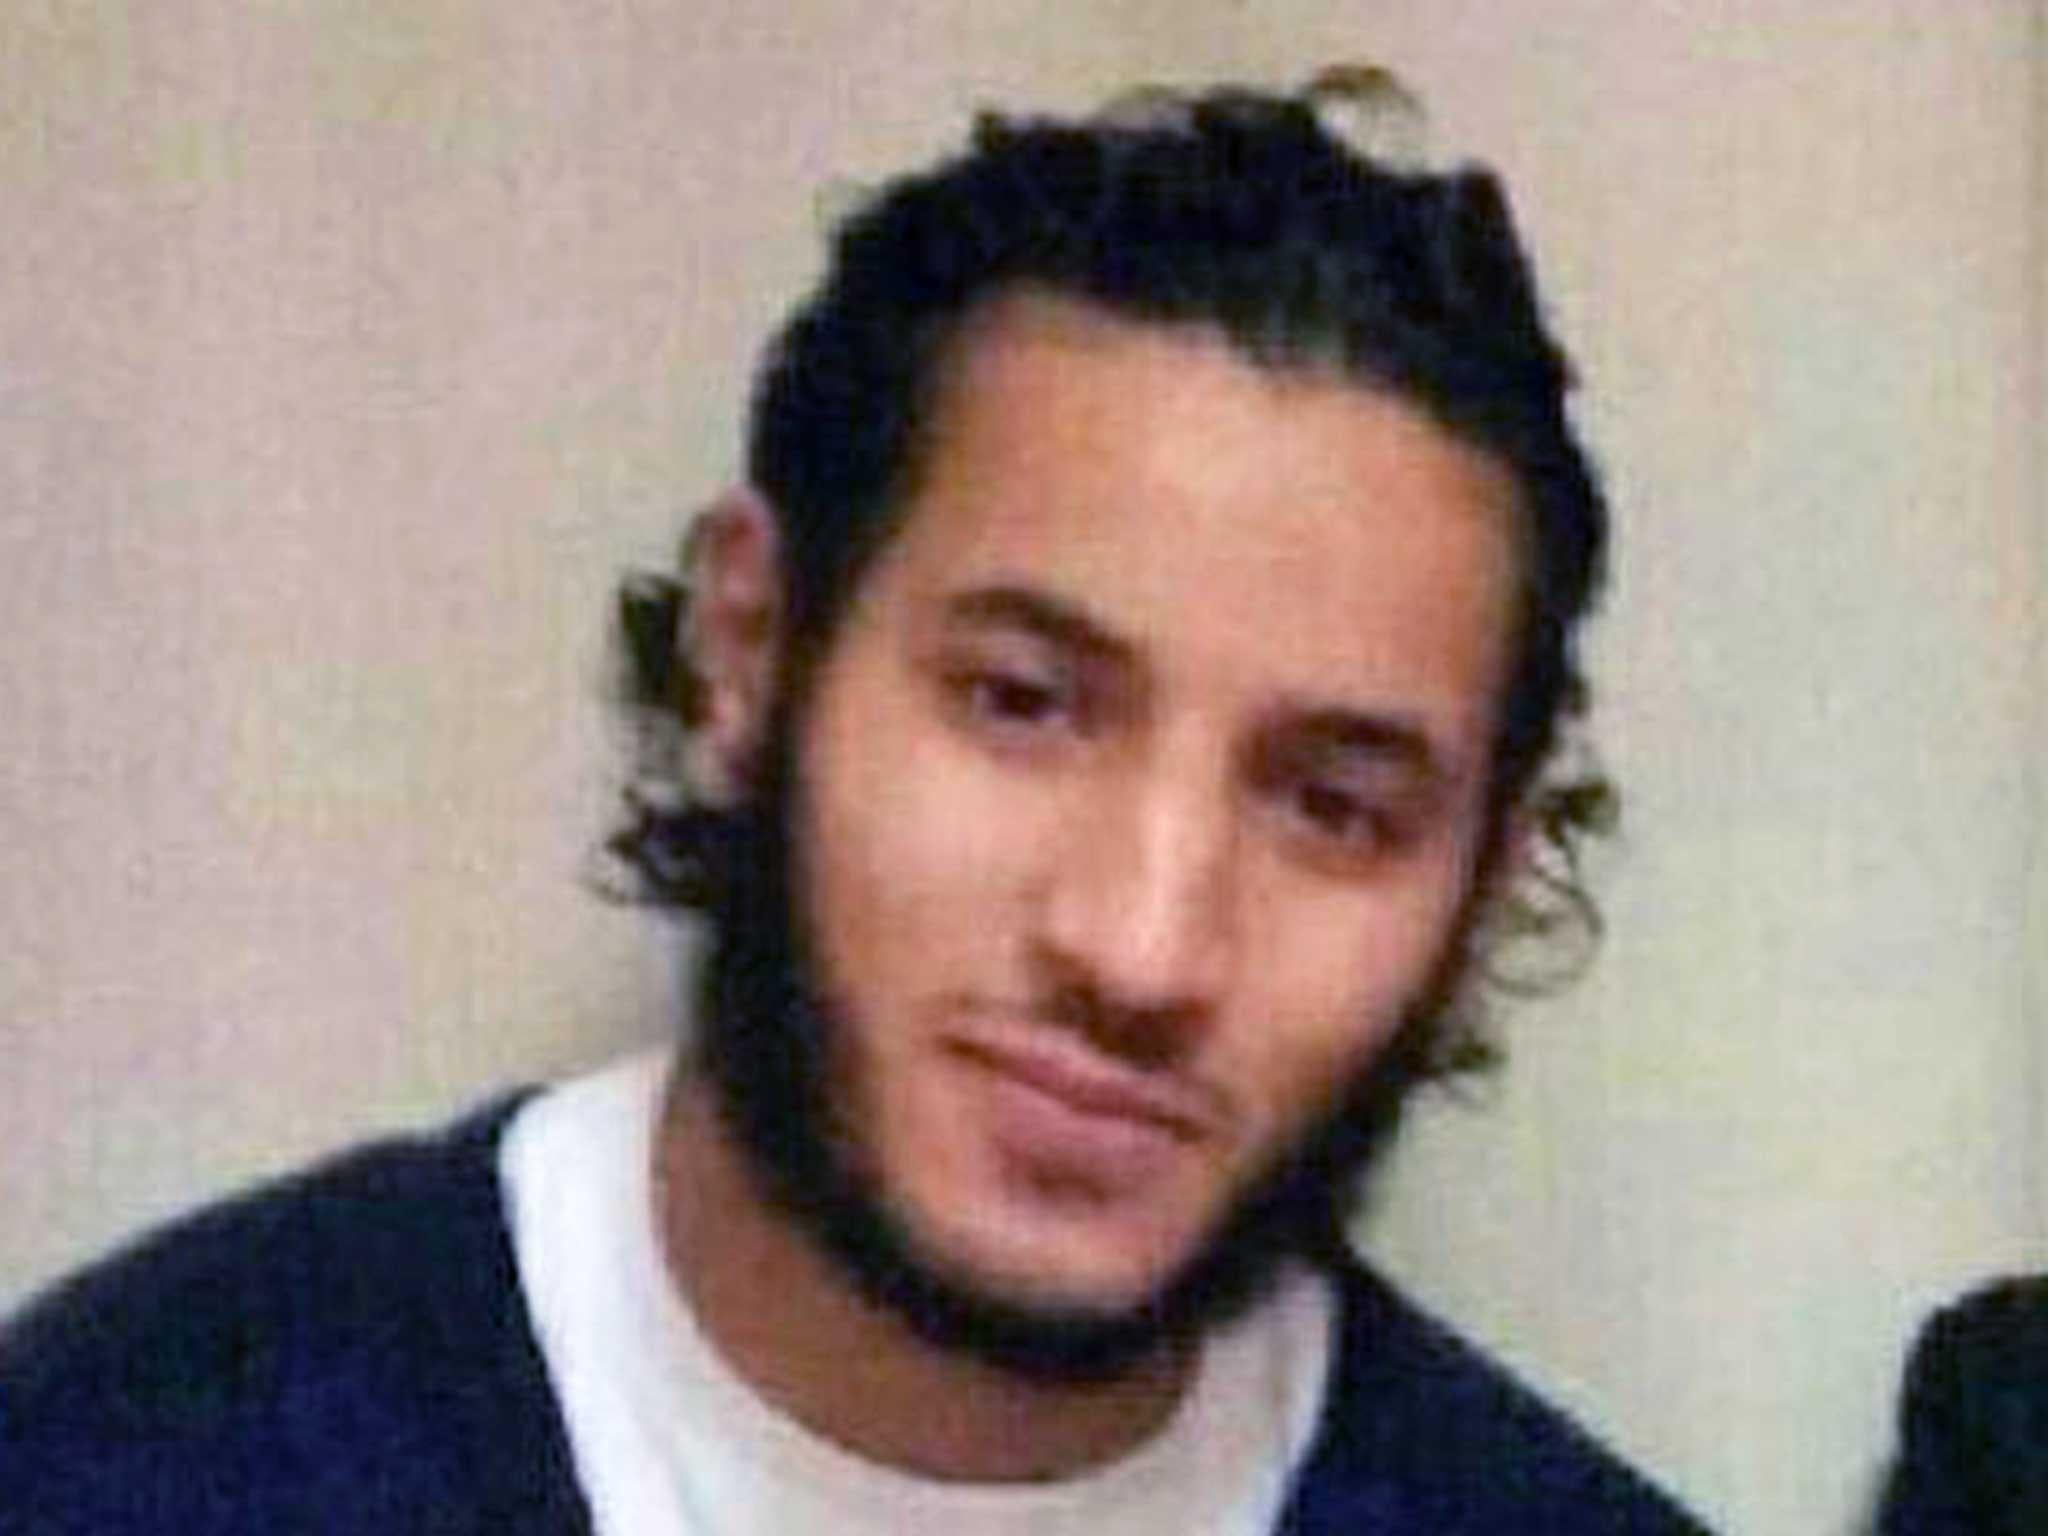 Larossi Abballa, 25, was convicted in 2013 of helping Islamist militants go to Pakistan